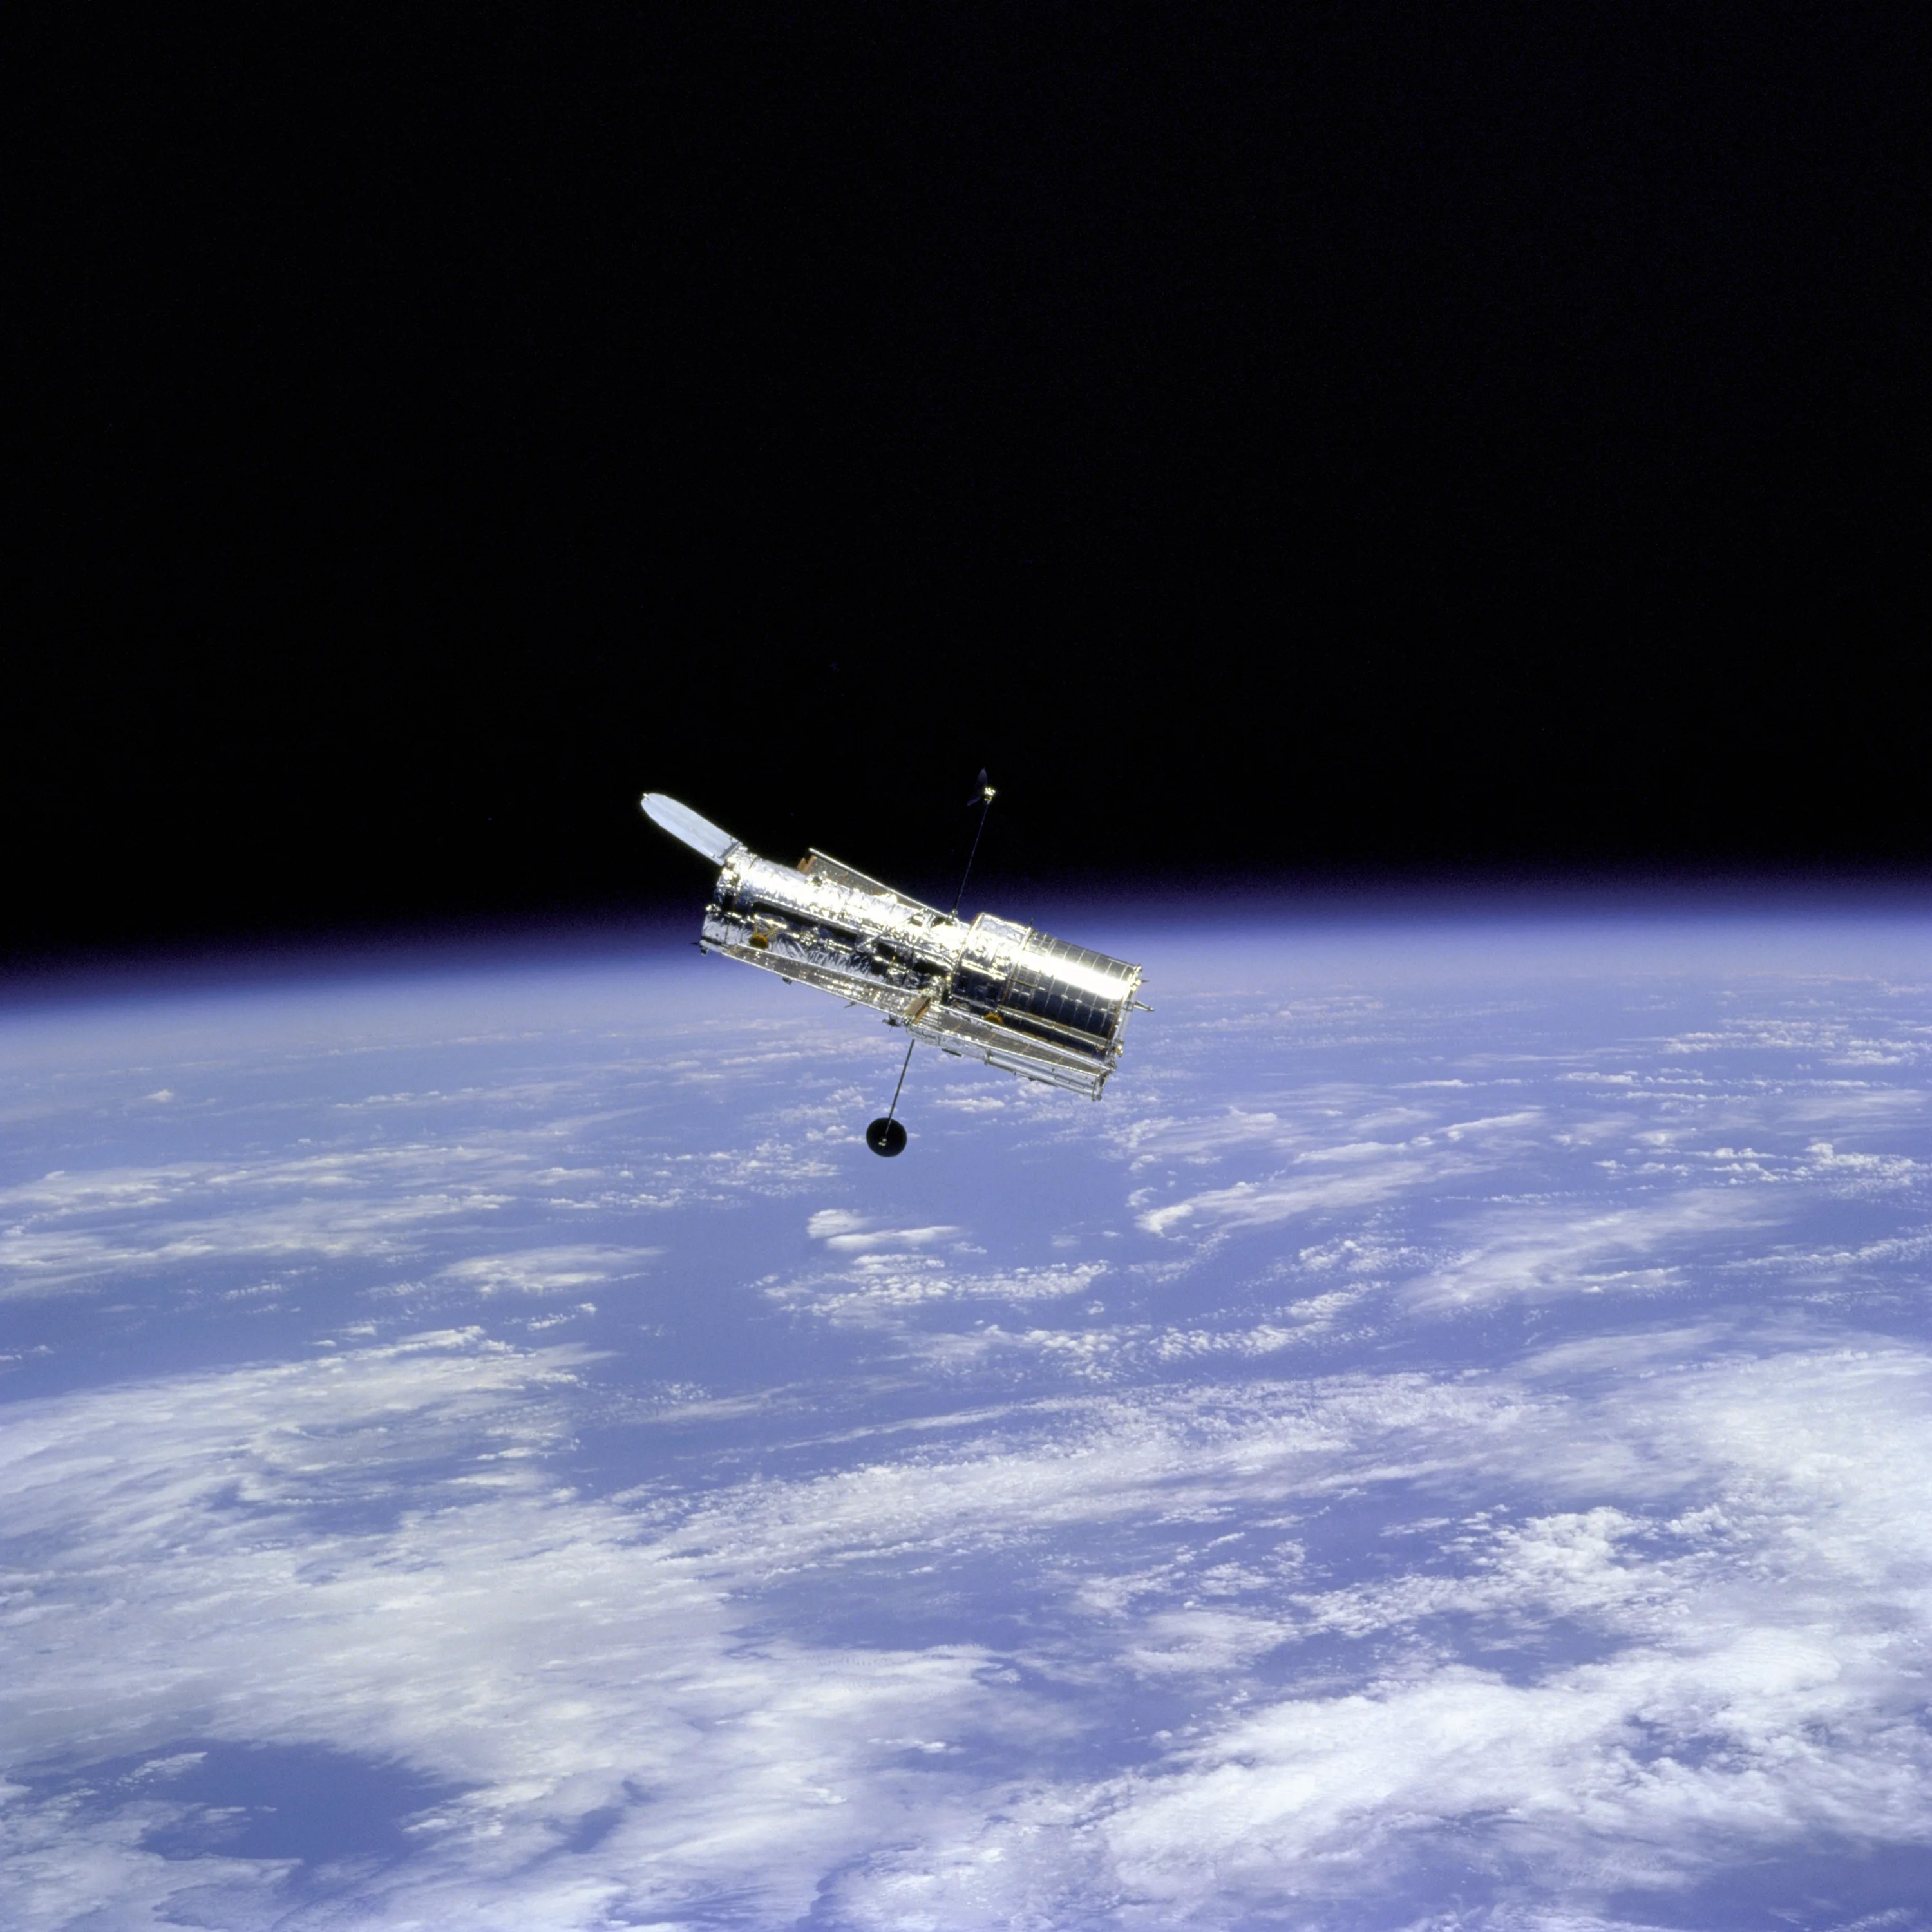 Hubble floats against the black background of space with the curve of the Earth below it. Pale blue oceans and white clouds are visible on Earth.